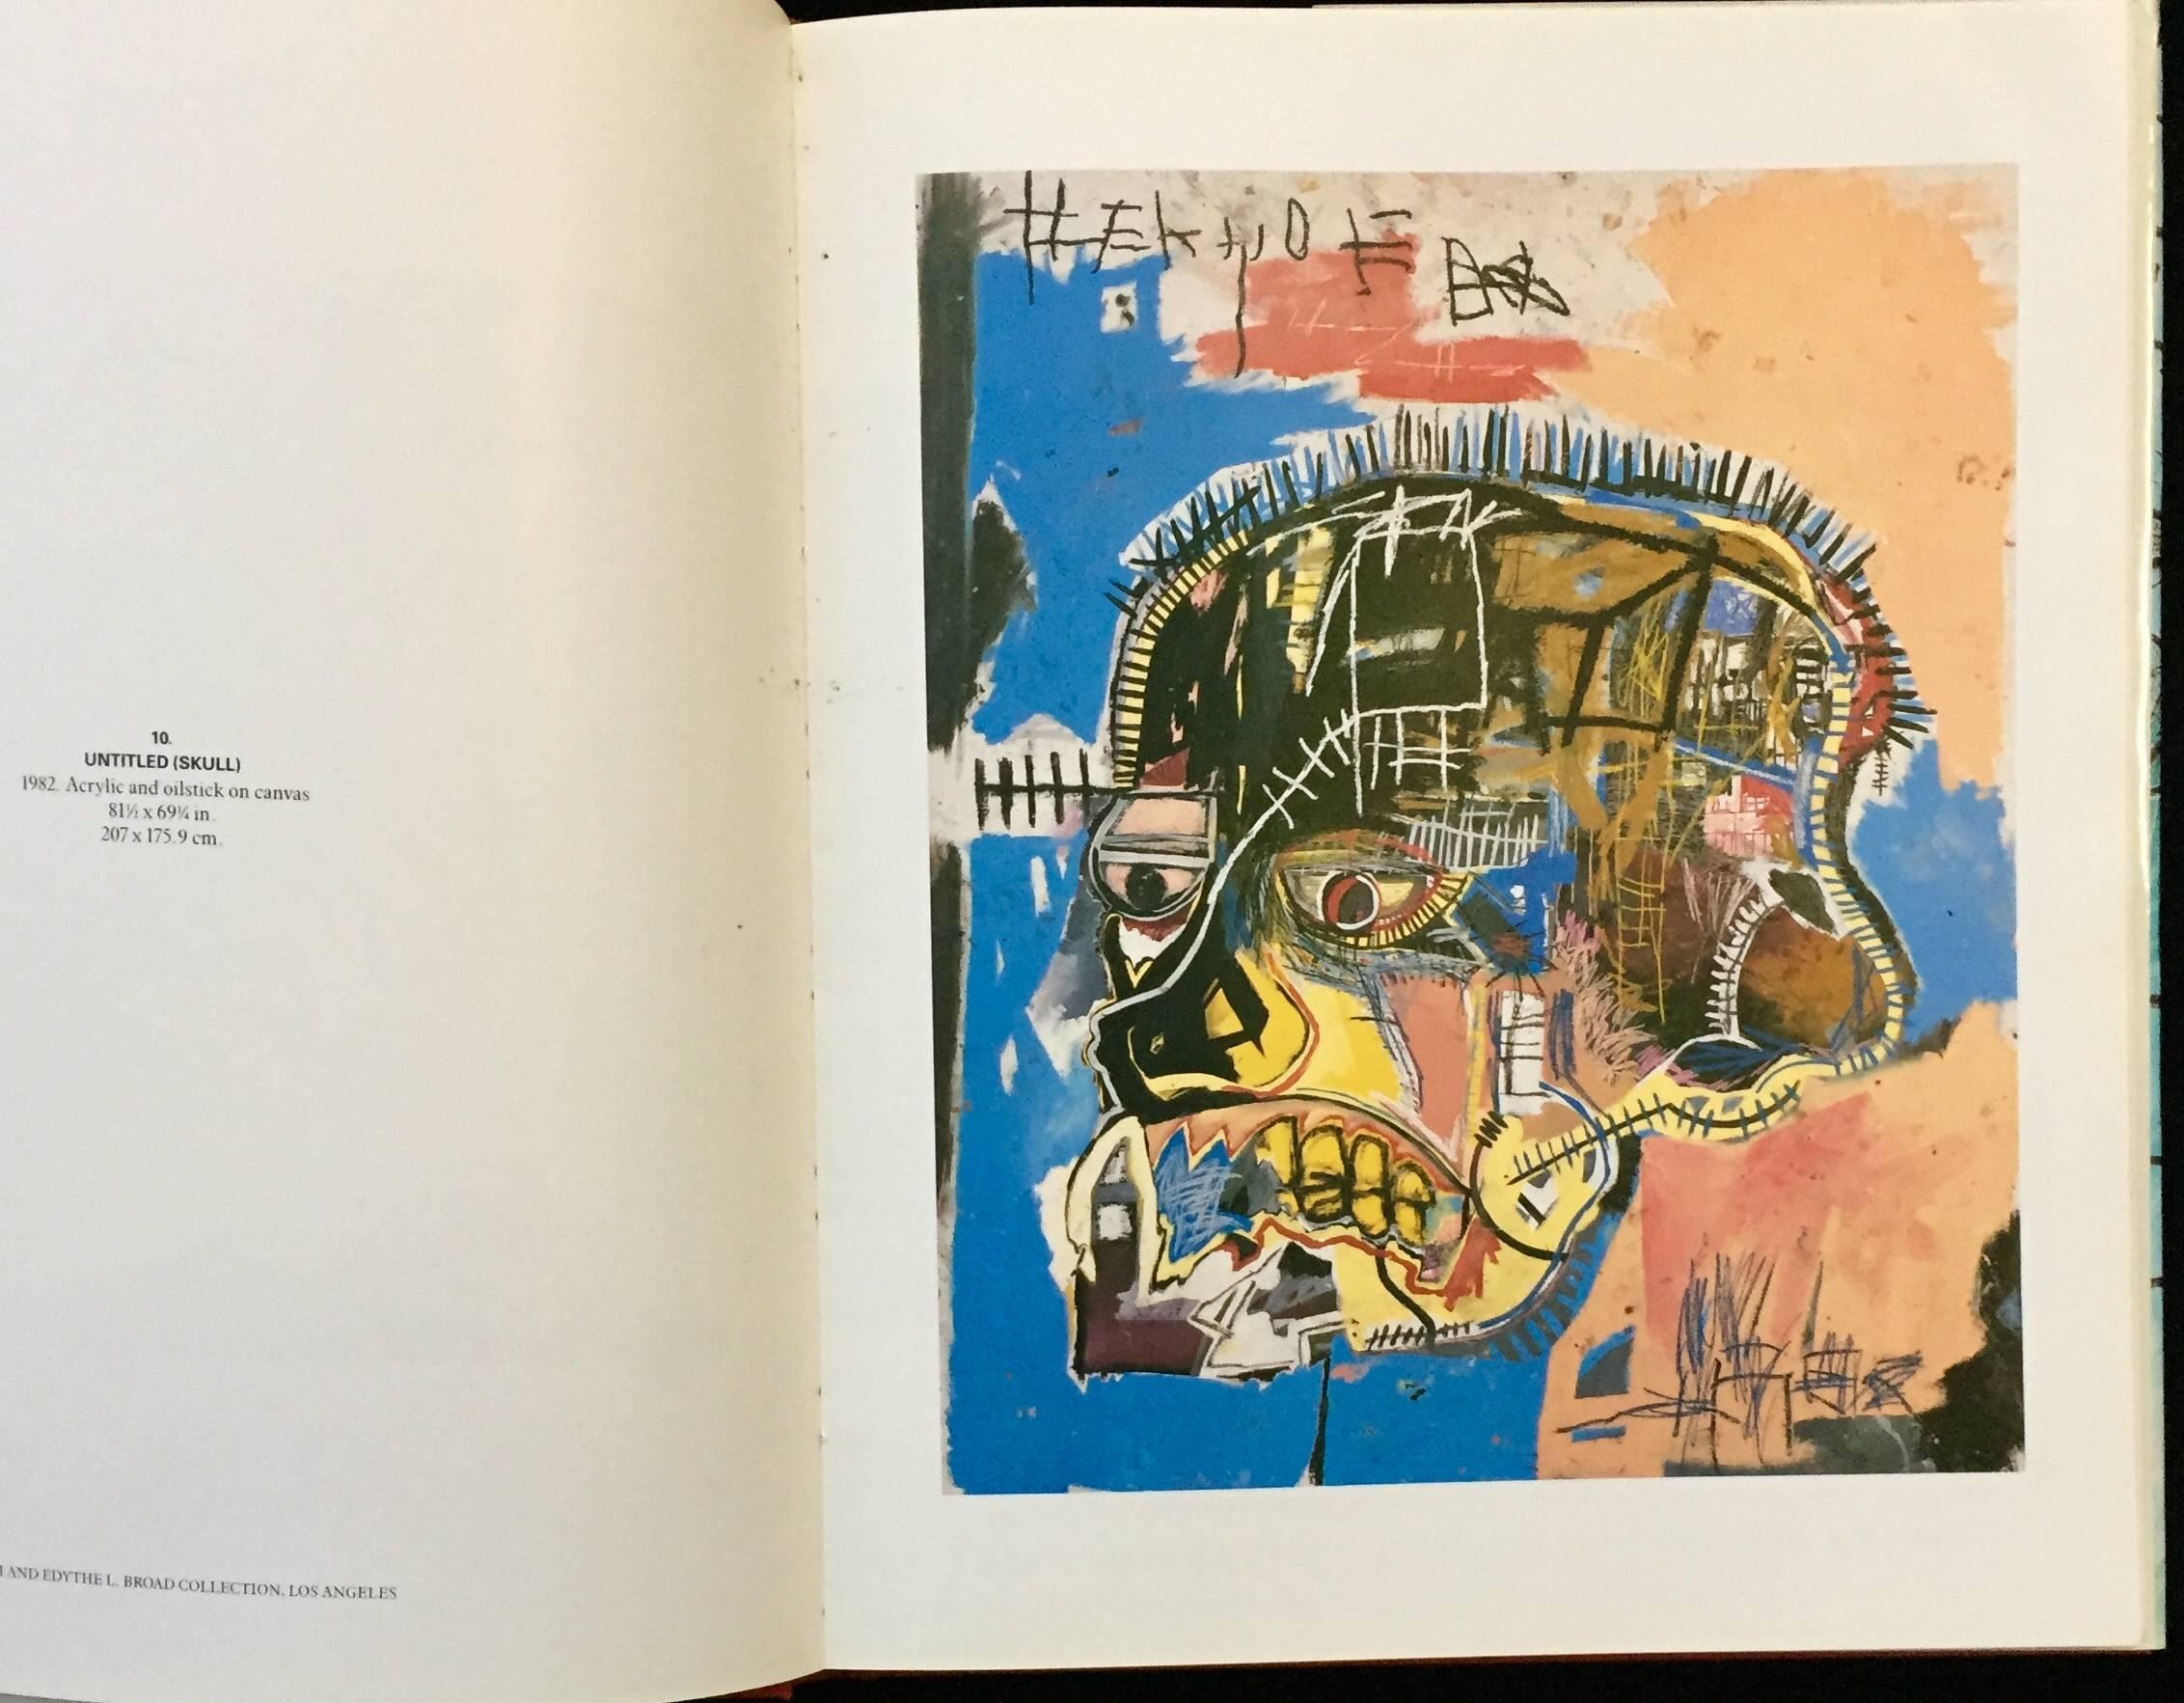 Jean-Michel Basquiat, Vrej Baghoomian Gallery, Exhibition Catalog, 1989 For Sale 3